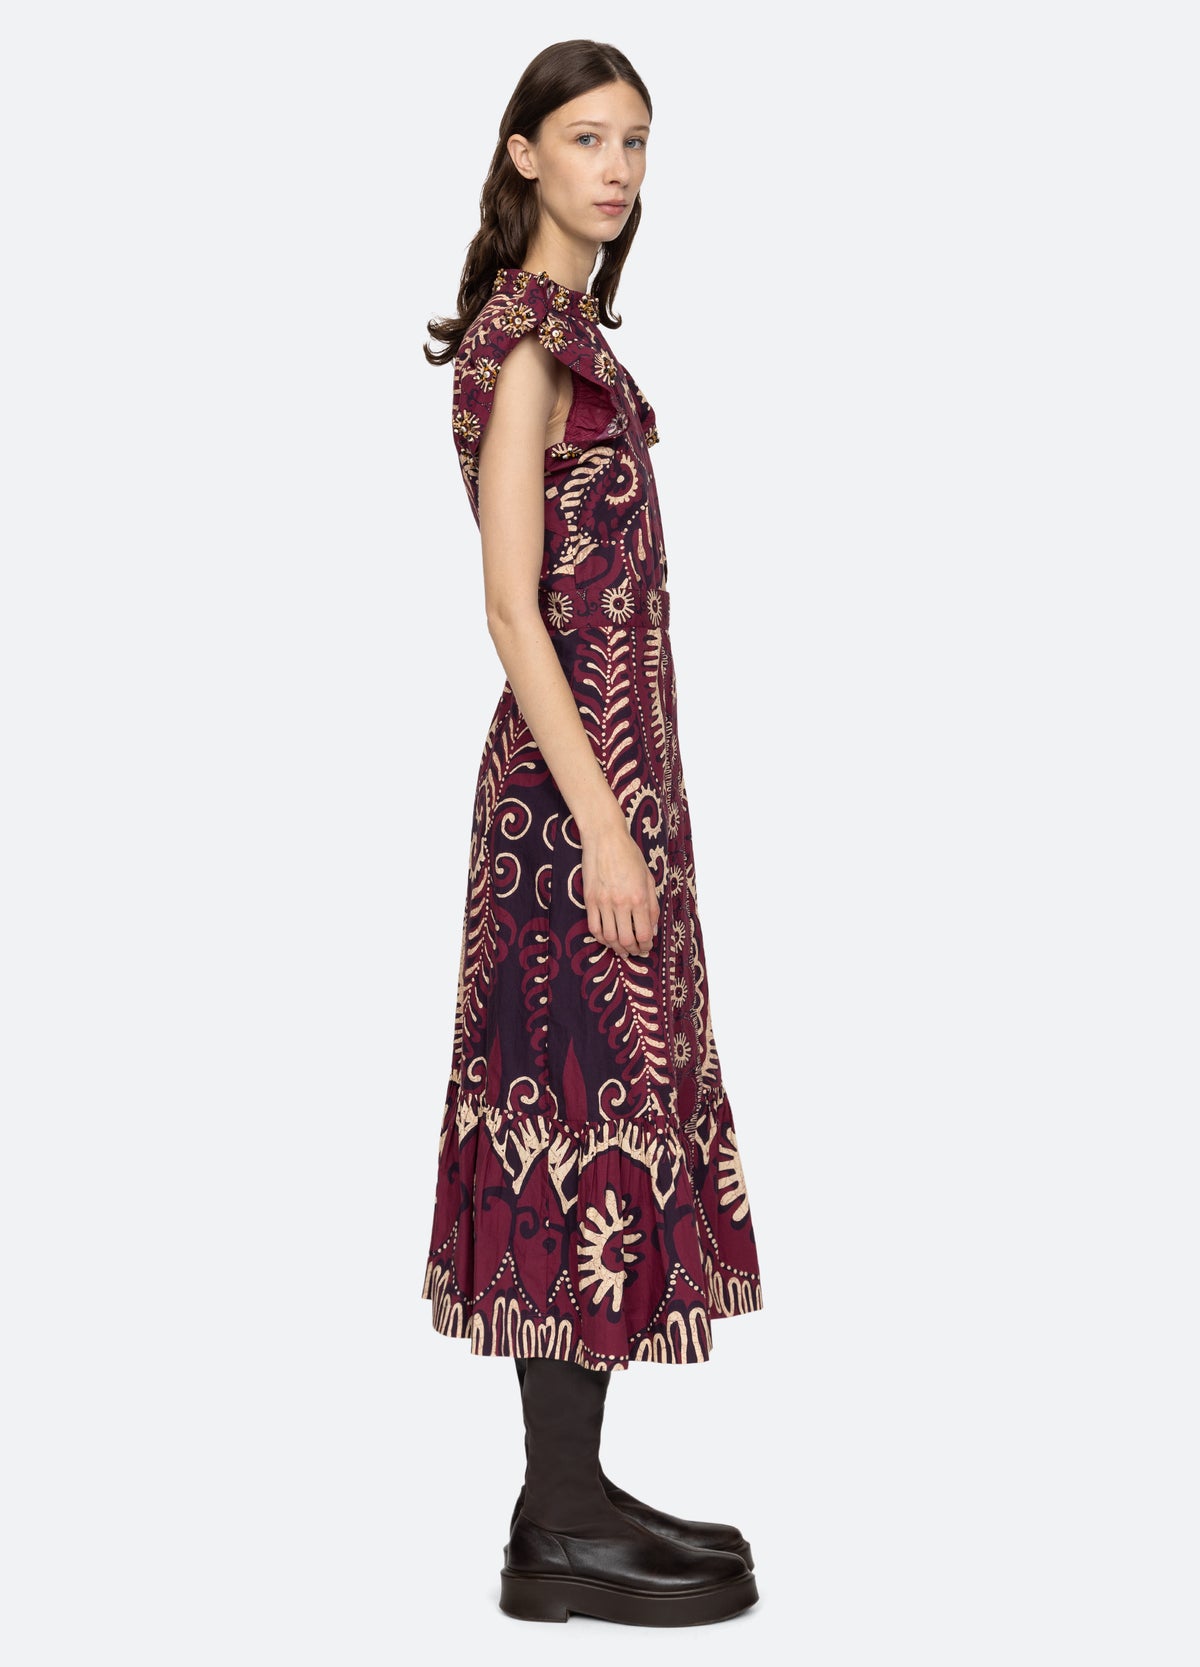 magenta-charlough s/s dress-side view - 11